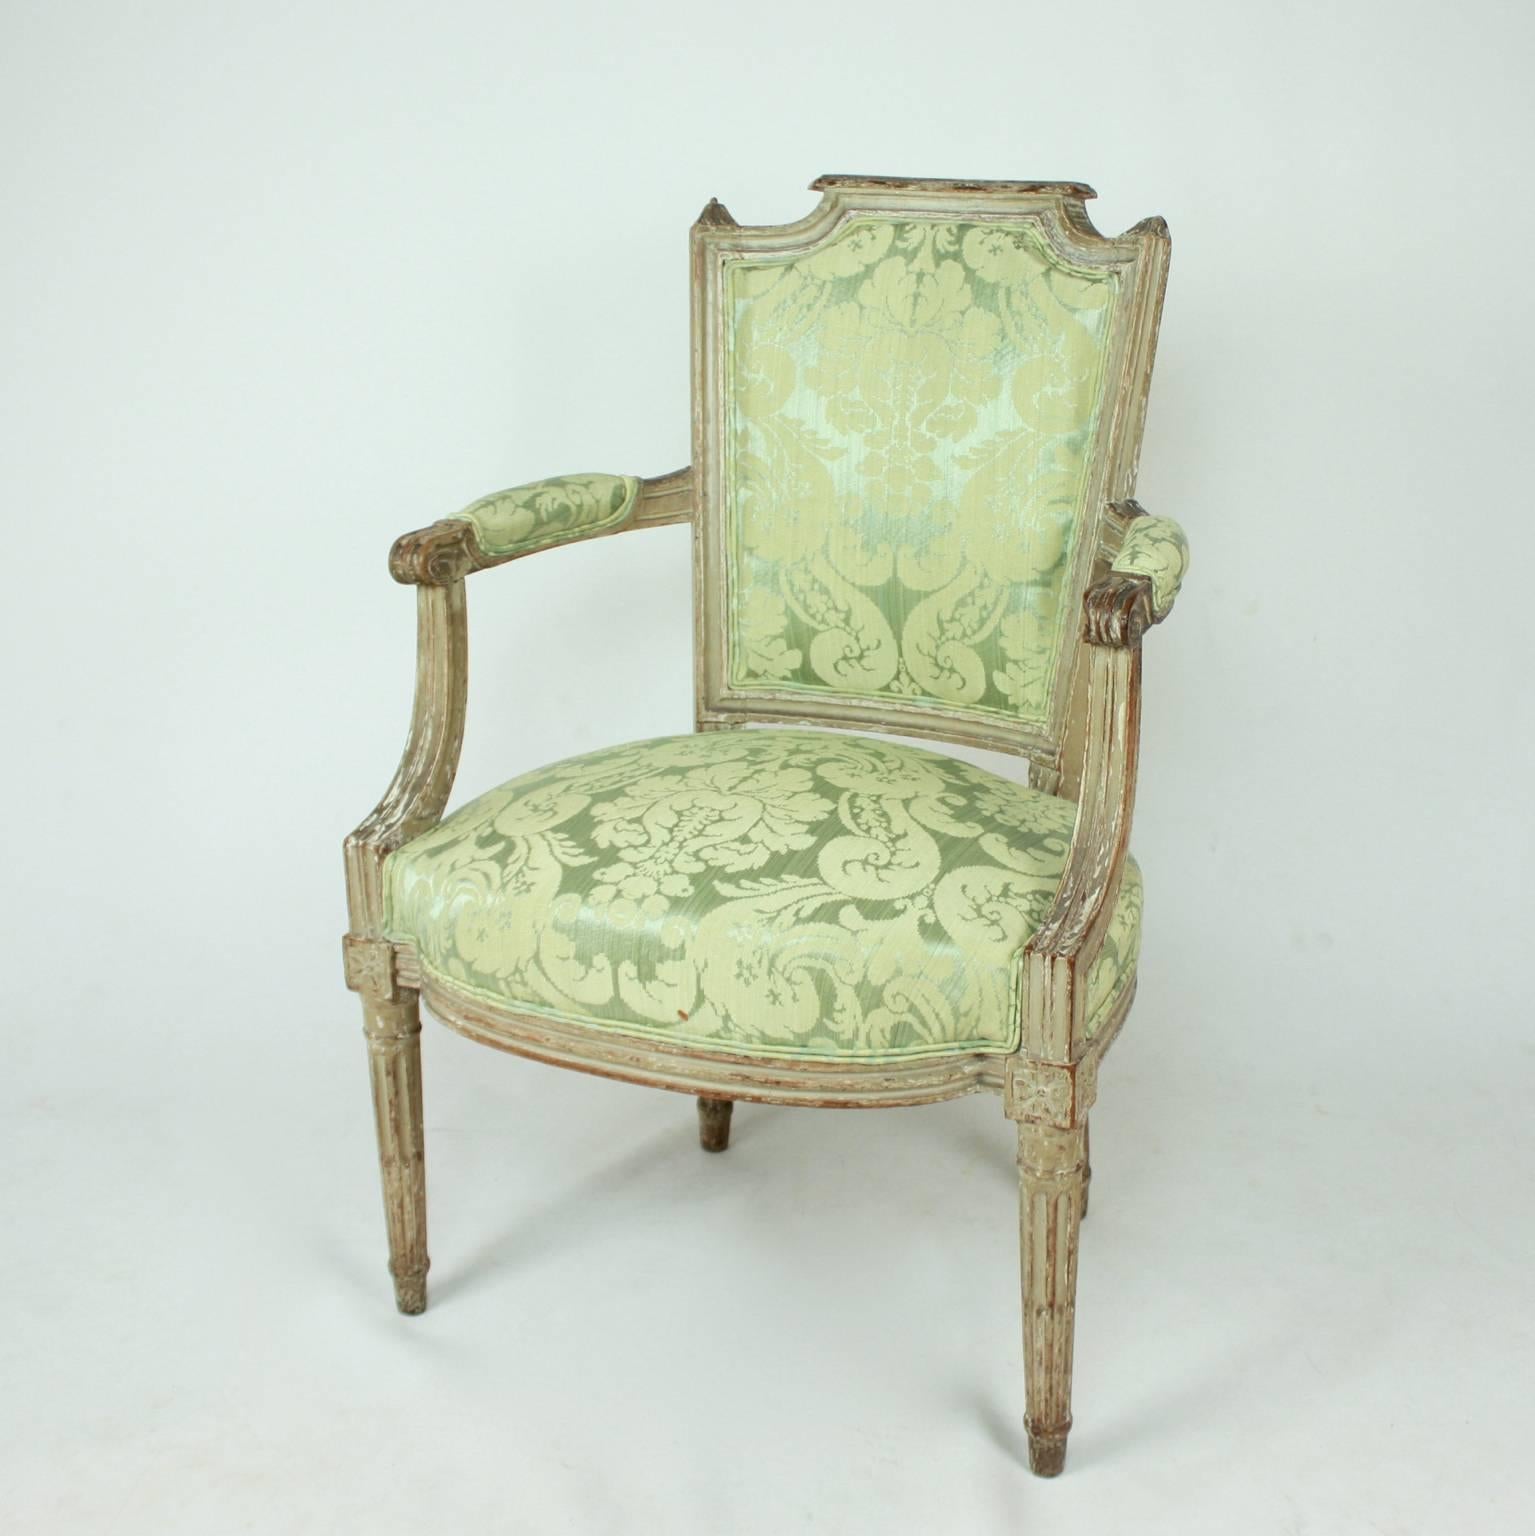 A pair of Louis XVI paint wood fauteuils or armchairs attributed to Claude II Sene´ (brother of Jean-Baptiste) called 'Le Jeune' (maître à Paris in 1769).
Both armchairs with a near-square back (a so called „Chapeau Gendarme“) with a